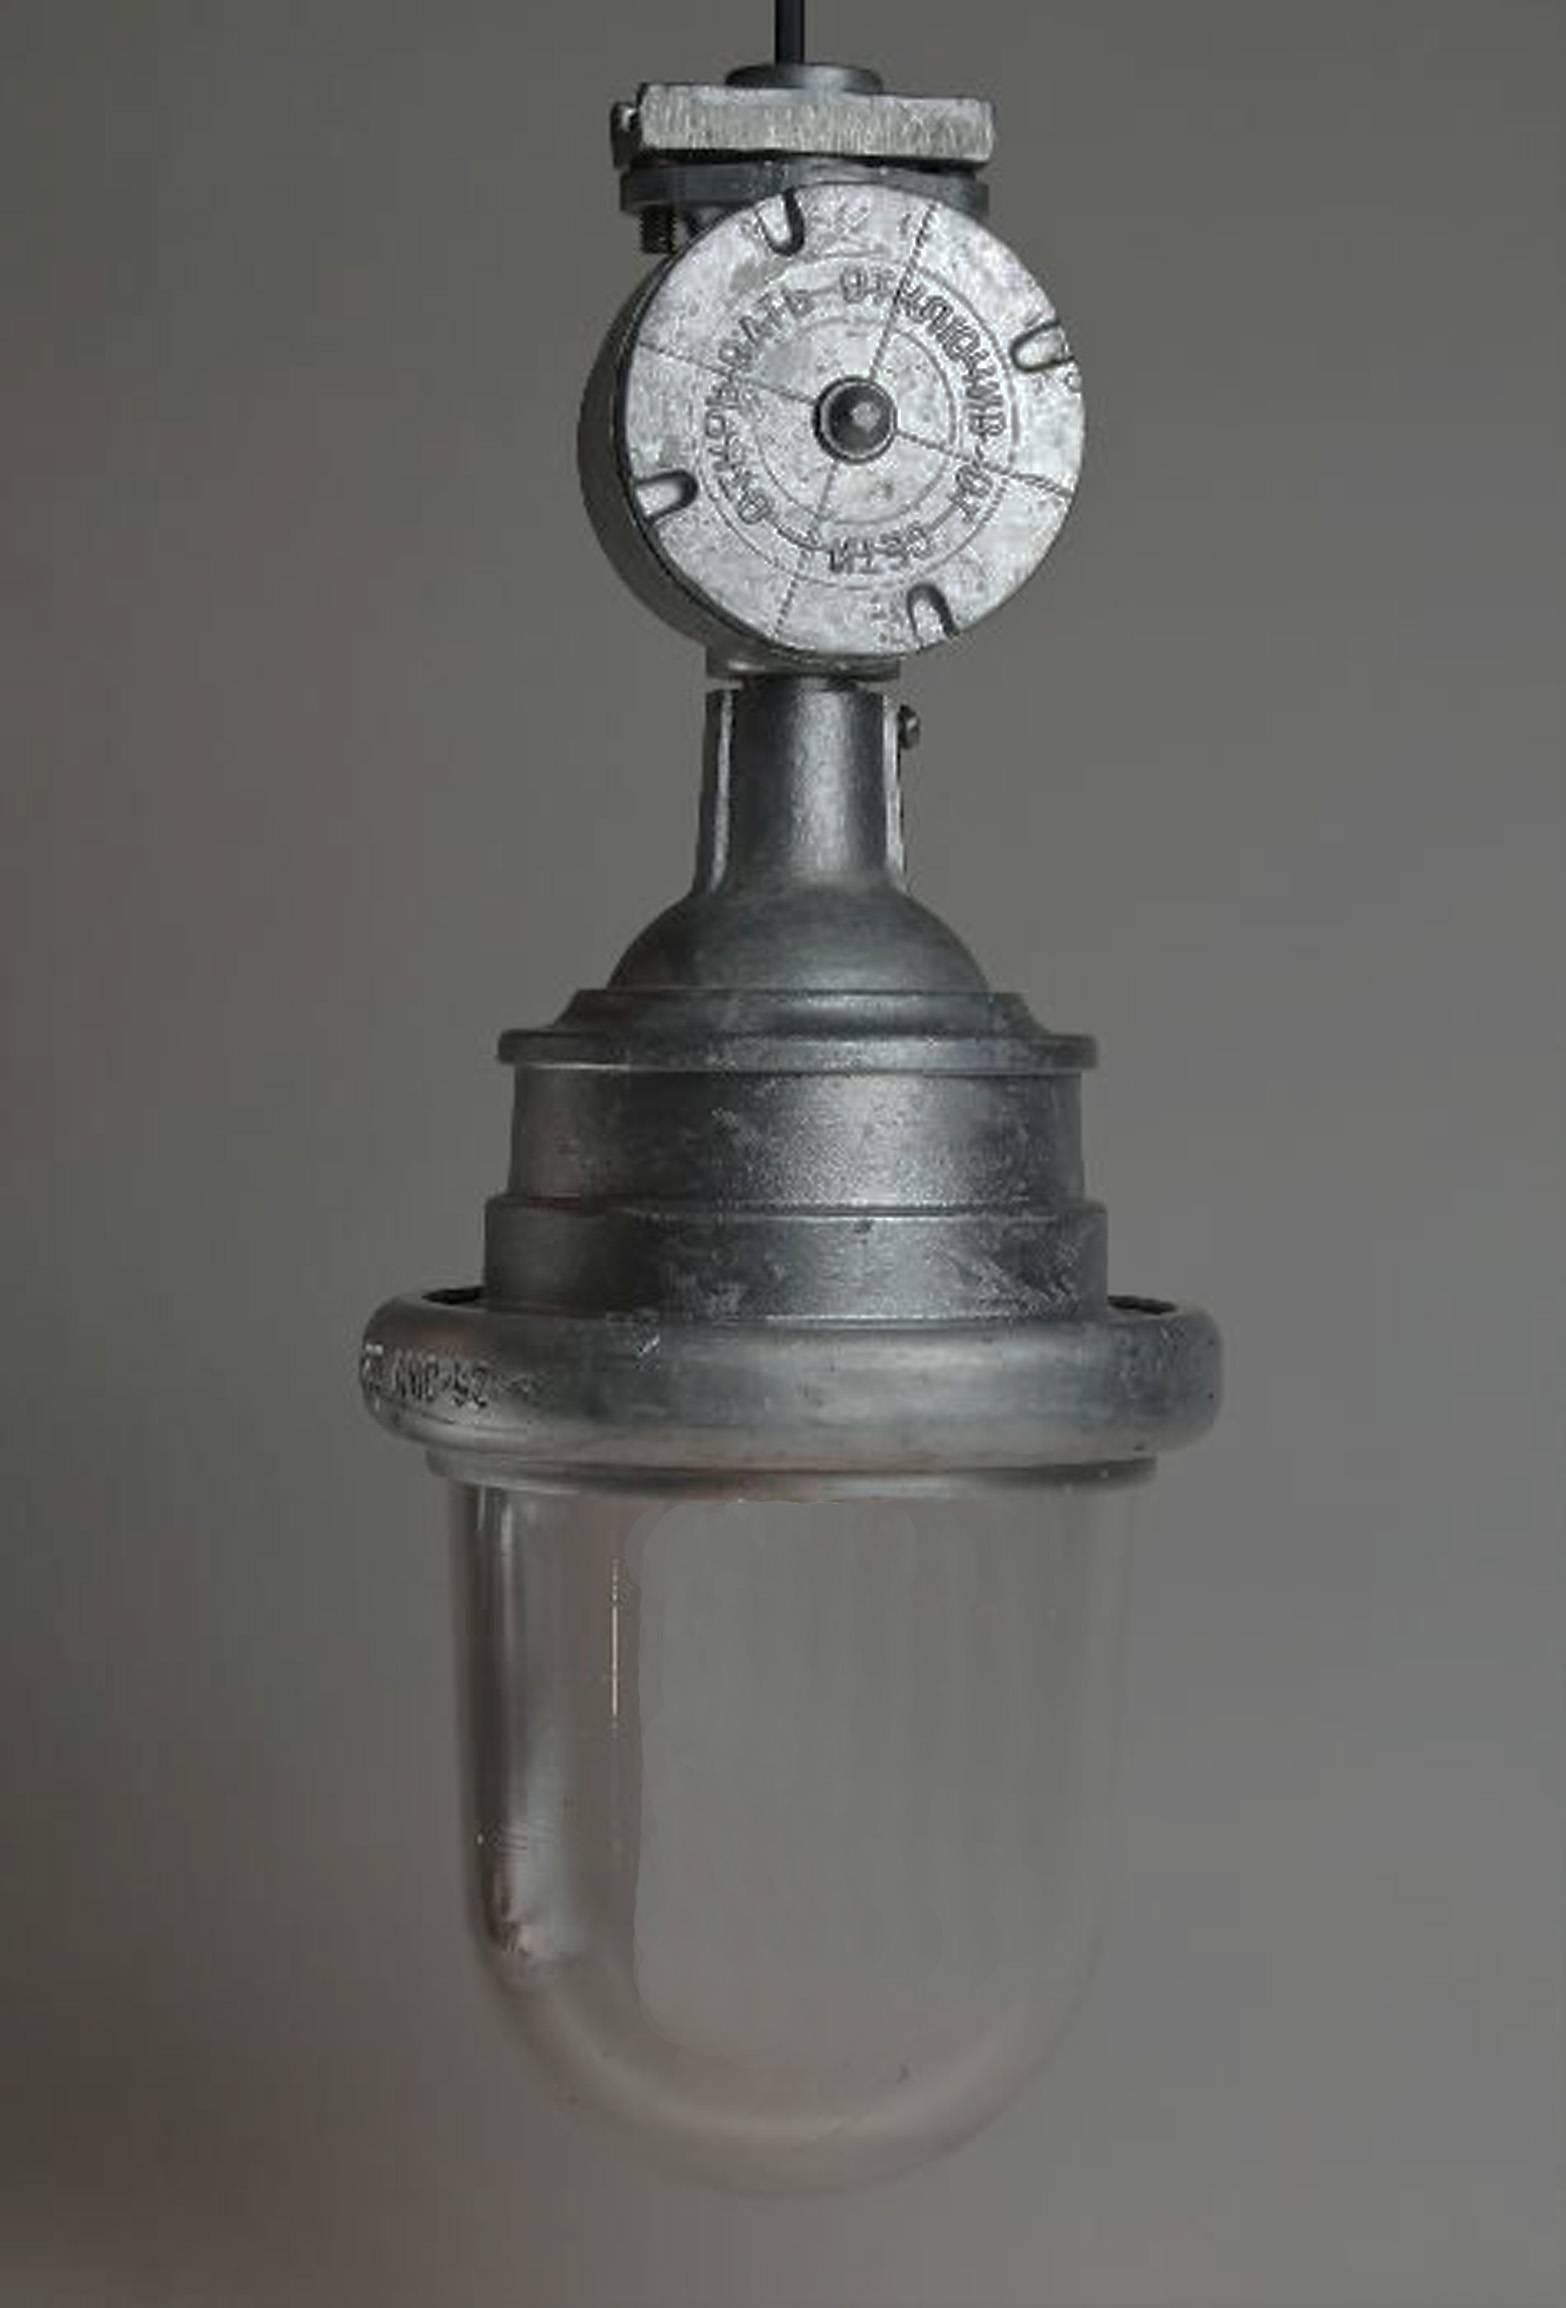 Soviet Industrial pendants/lamps with aluminum top and heavy glass from the 1970s.
Marked CCCP.
Dimensions: Ø. 21cm, H. 52cm, about 7kg.
Up to 22 pieces available.